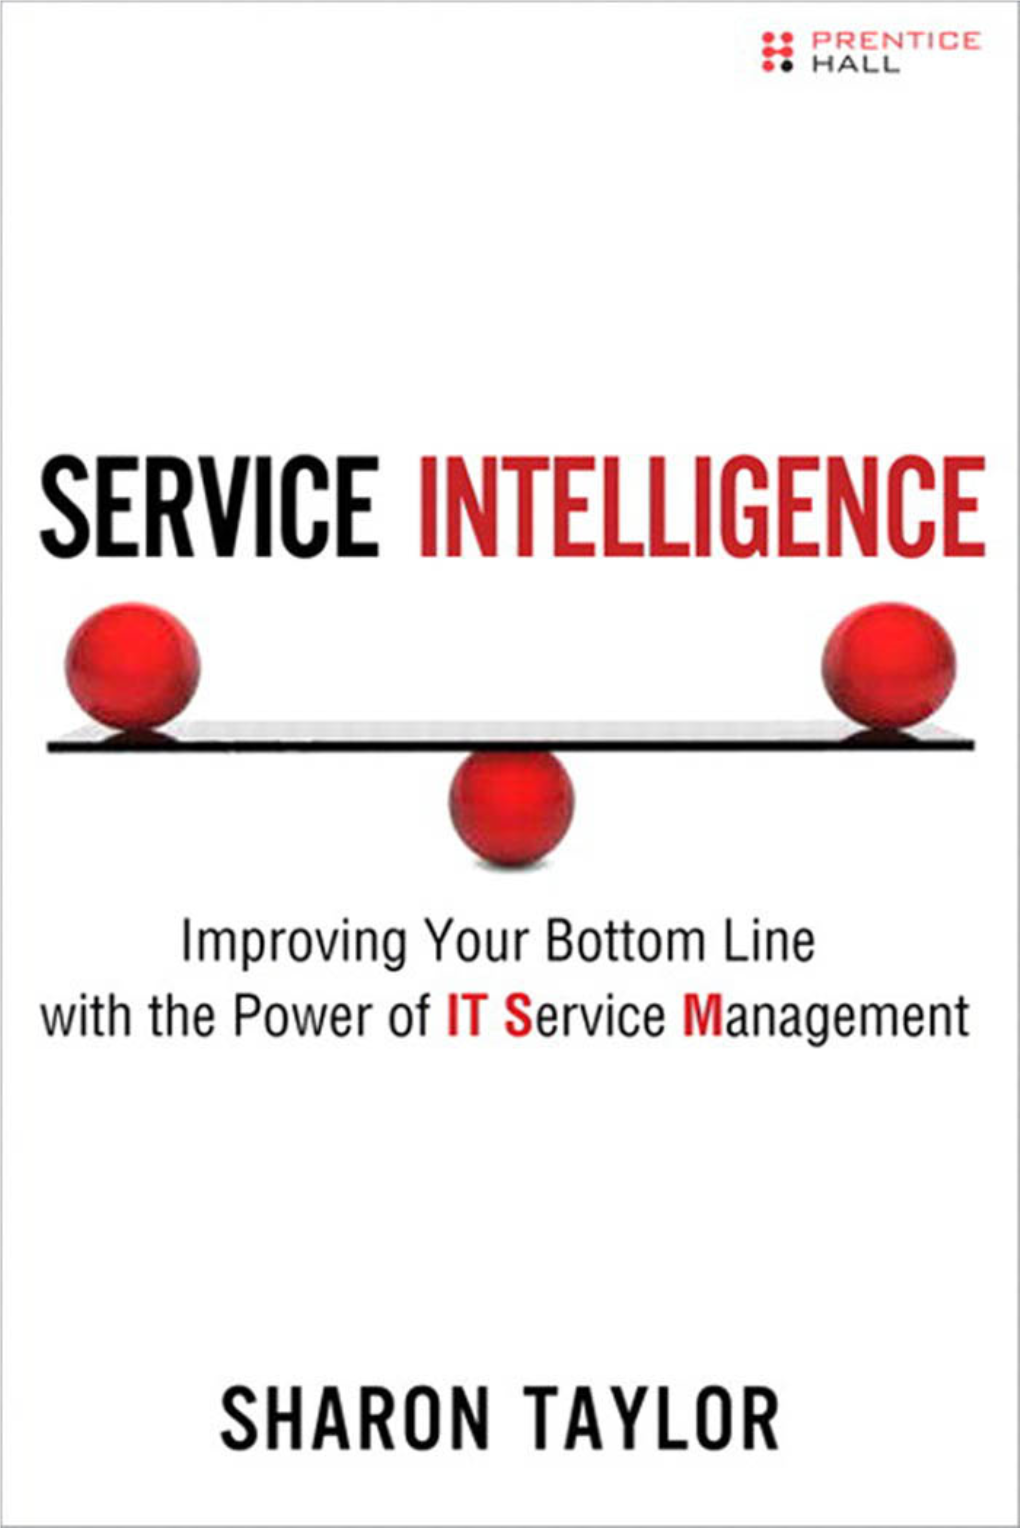 Service Intelligence: Improving Your Bottom Line with the Power of IT